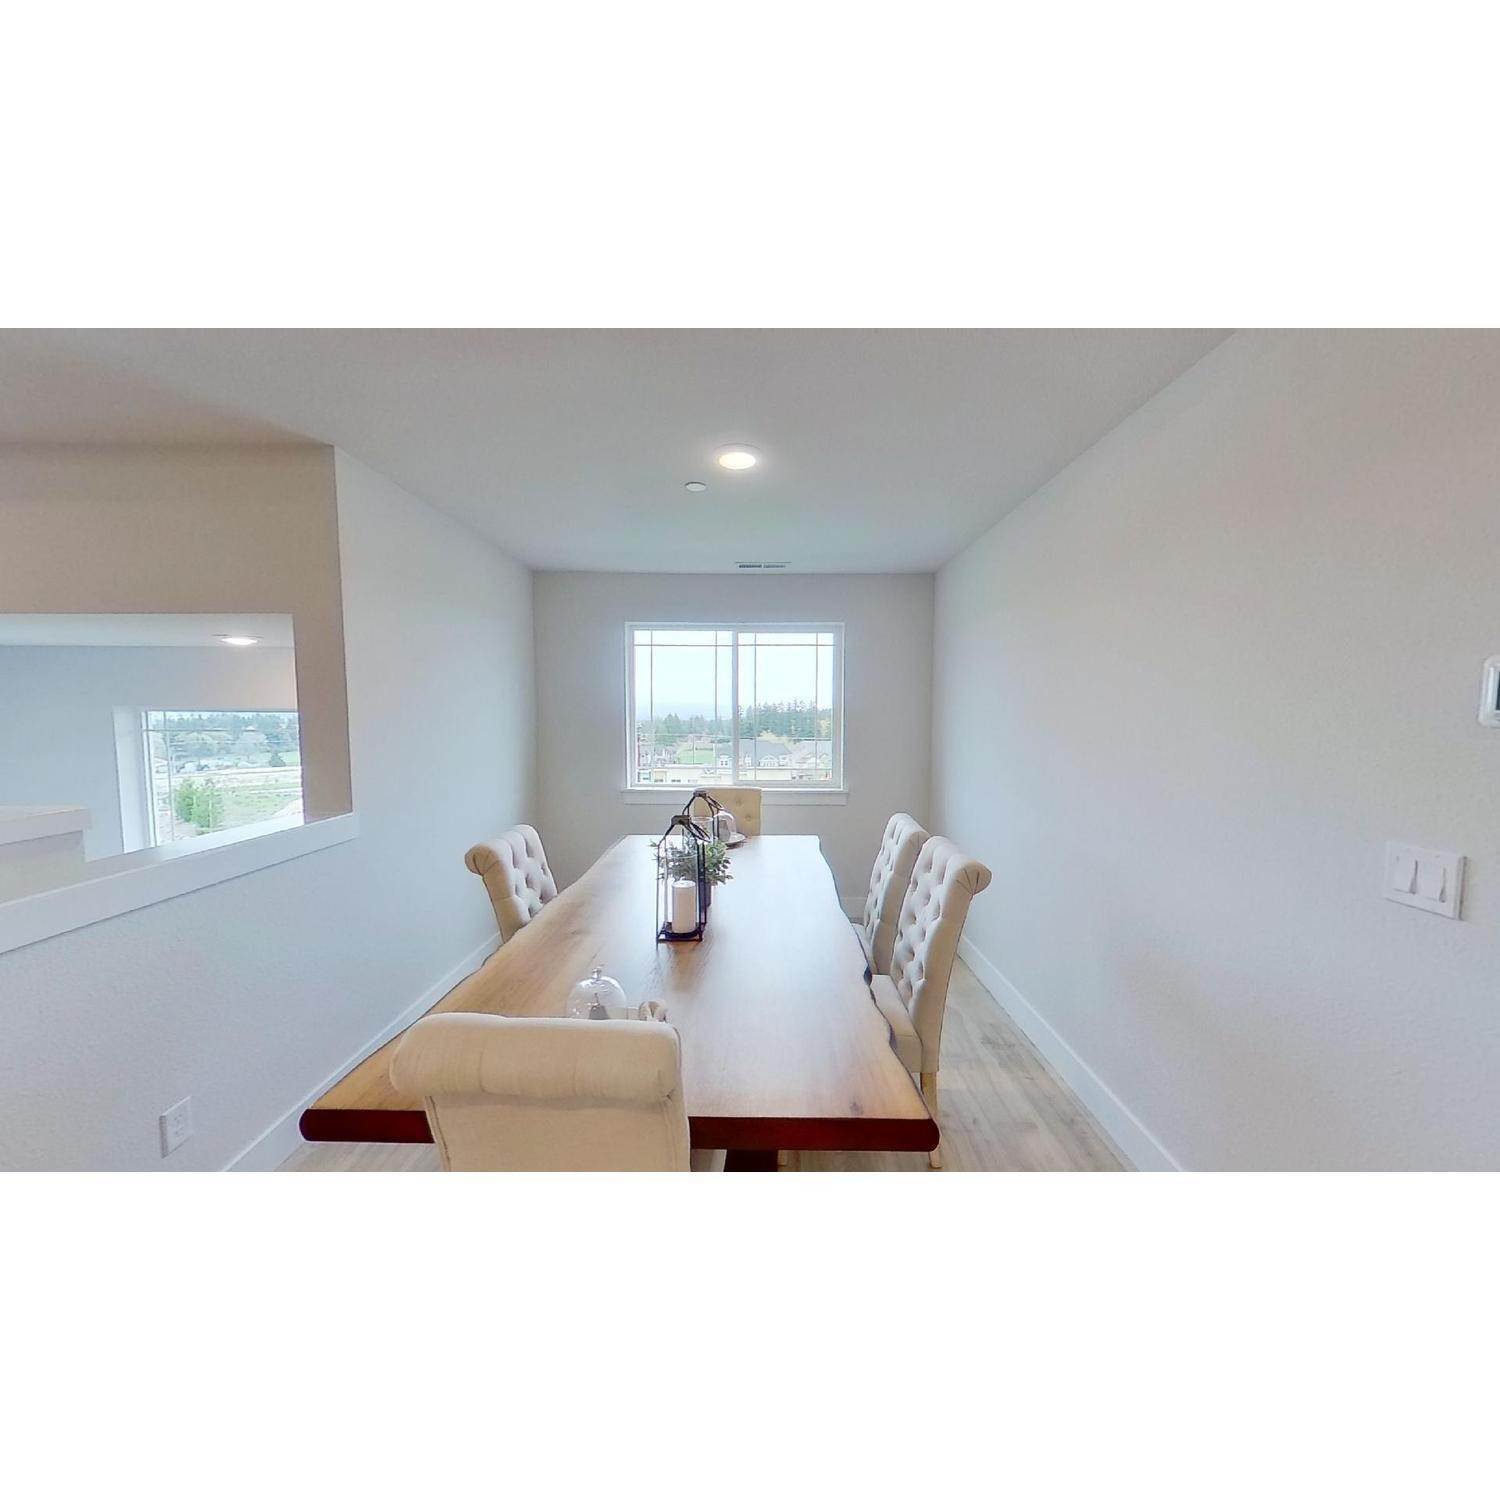 47. 16786 SW Leaf Lane, Tigard, OR 97224에 South River Terrace Innovate Condominiums 건물